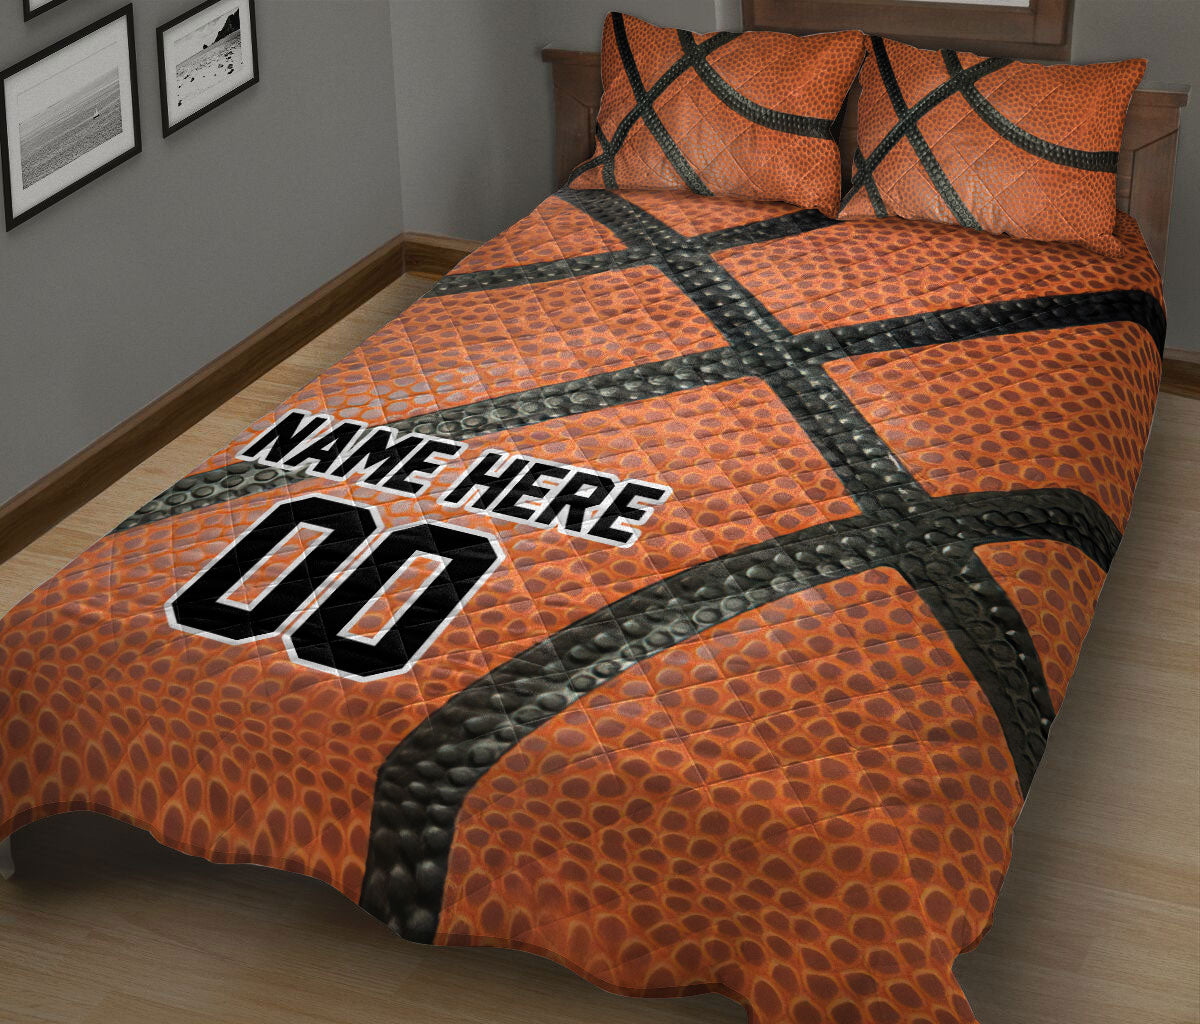 Ohaprints-Quilt-Bed-Set-Pillowcase-Basketball-Orange-Ball-Gifts-For-Sports-Lover-Custom-Personalized-Name-Blanket-Bedspread-Bedding-754-King (90'' x 100'')